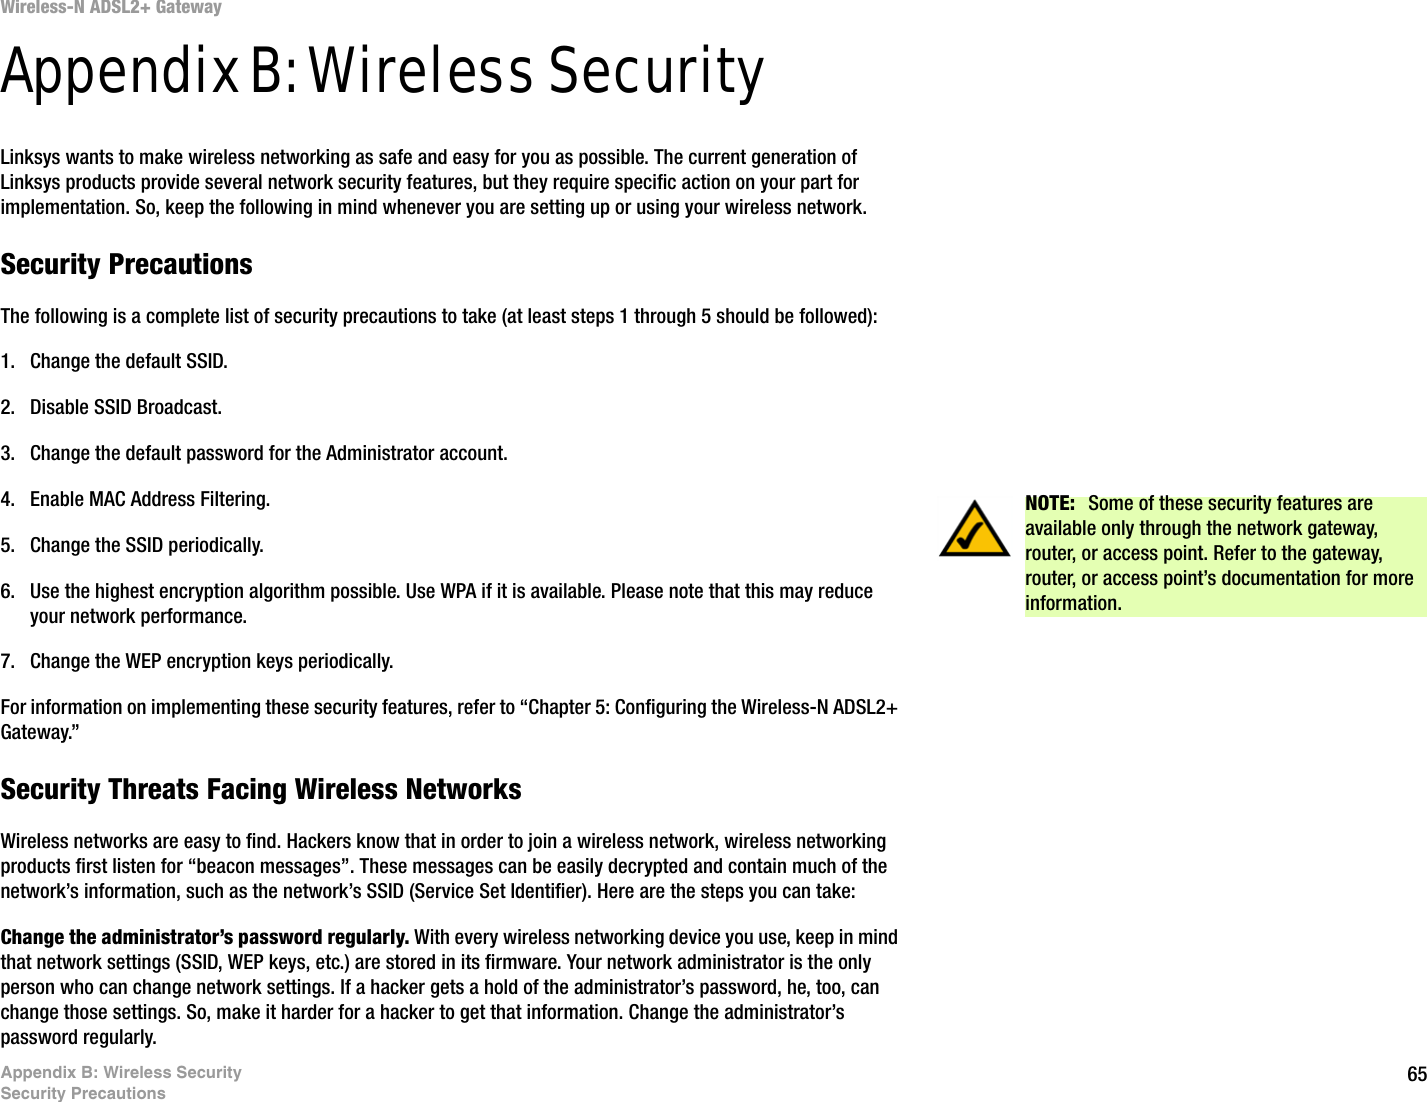 65Appendix B: Wireless SecuritySecurity PrecautionsWireless-N ADSL2+ GatewayAppendix B: Wireless SecurityLinksys wants to make wireless networking as safe and easy for you as possible. The current generation of Linksys products provide several network security features, but they require specific action on your part for implementation. So, keep the following in mind whenever you are setting up or using your wireless network.Security PrecautionsThe following is a complete list of security precautions to take (at least steps 1 through 5 should be followed):1. Change the default SSID. 2. Disable SSID Broadcast. 3. Change the default password for the Administrator account. 4. Enable MAC Address Filtering. 5. Change the SSID periodically. 6. Use the highest encryption algorithm possible. Use WPA if it is available. Please note that this may reduce your network performance. 7. Change the WEP encryption keys periodically. For information on implementing these security features, refer to “Chapter 5: Configuring the Wireless-N ADSL2+ Gateway.”Security Threats Facing Wireless Networks Wireless networks are easy to find. Hackers know that in order to join a wireless network, wireless networking products first listen for “beacon messages”. These messages can be easily decrypted and contain much of the network’s information, such as the network’s SSID (Service Set Identifier). Here are the steps you can take:Change the administrator’s password regularly. With every wireless networking device you use, keep in mind that network settings (SSID, WEP keys, etc.) are stored in its firmware. Your network administrator is the only person who can change network settings. If a hacker gets a hold of the administrator’s password, he, too, can change those settings. So, make it harder for a hacker to get that information. Change the administrator’s password regularly.NOTE:  Some of these security features are available only through the network gateway, router, or access point. Refer to the gateway, router, or access point’s documentation for more information.